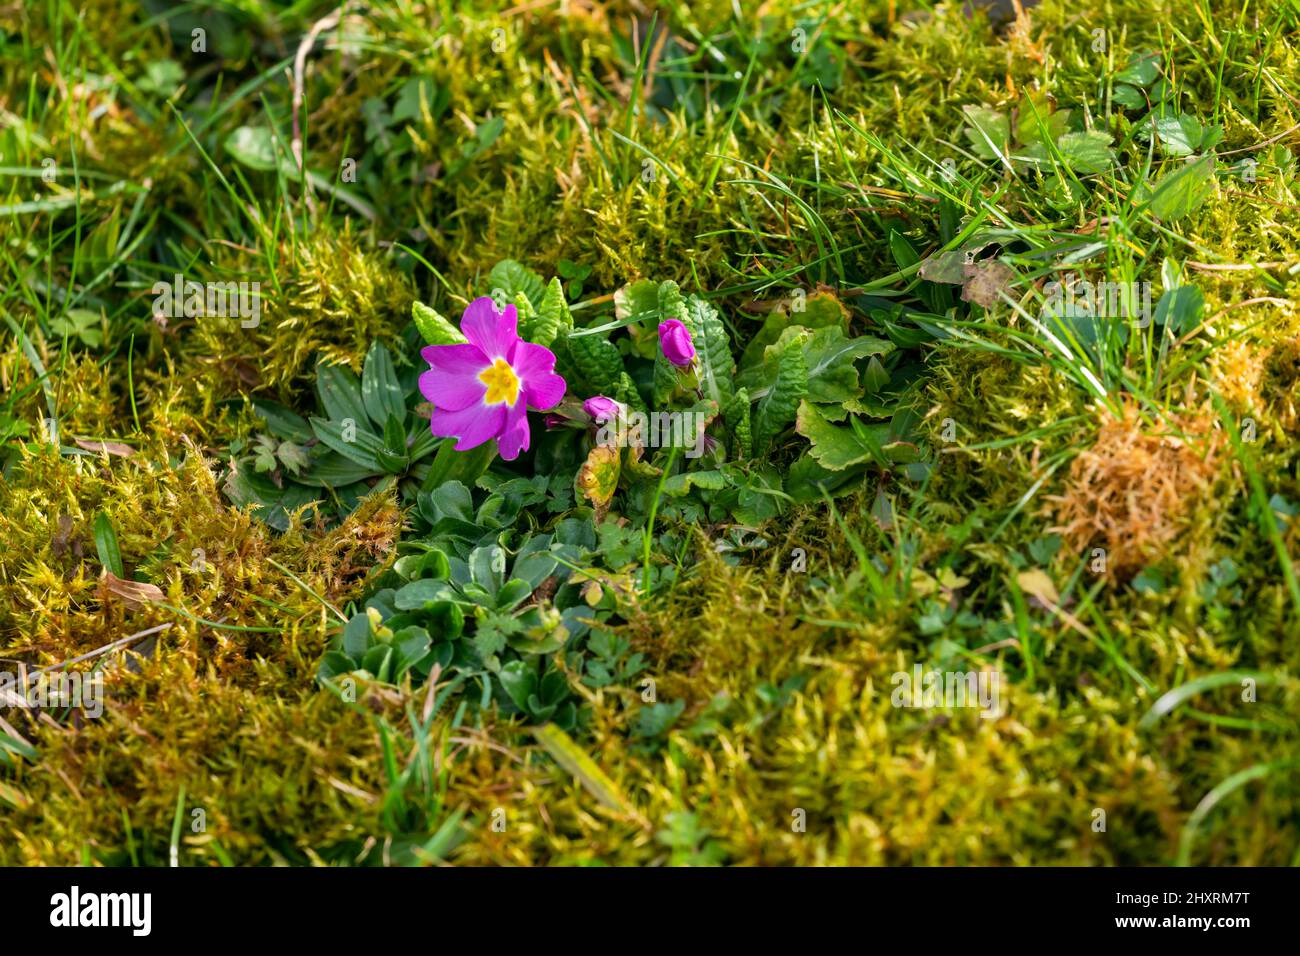 A real cowslip or primrose grows along the way as a herald of spring Stock Photo